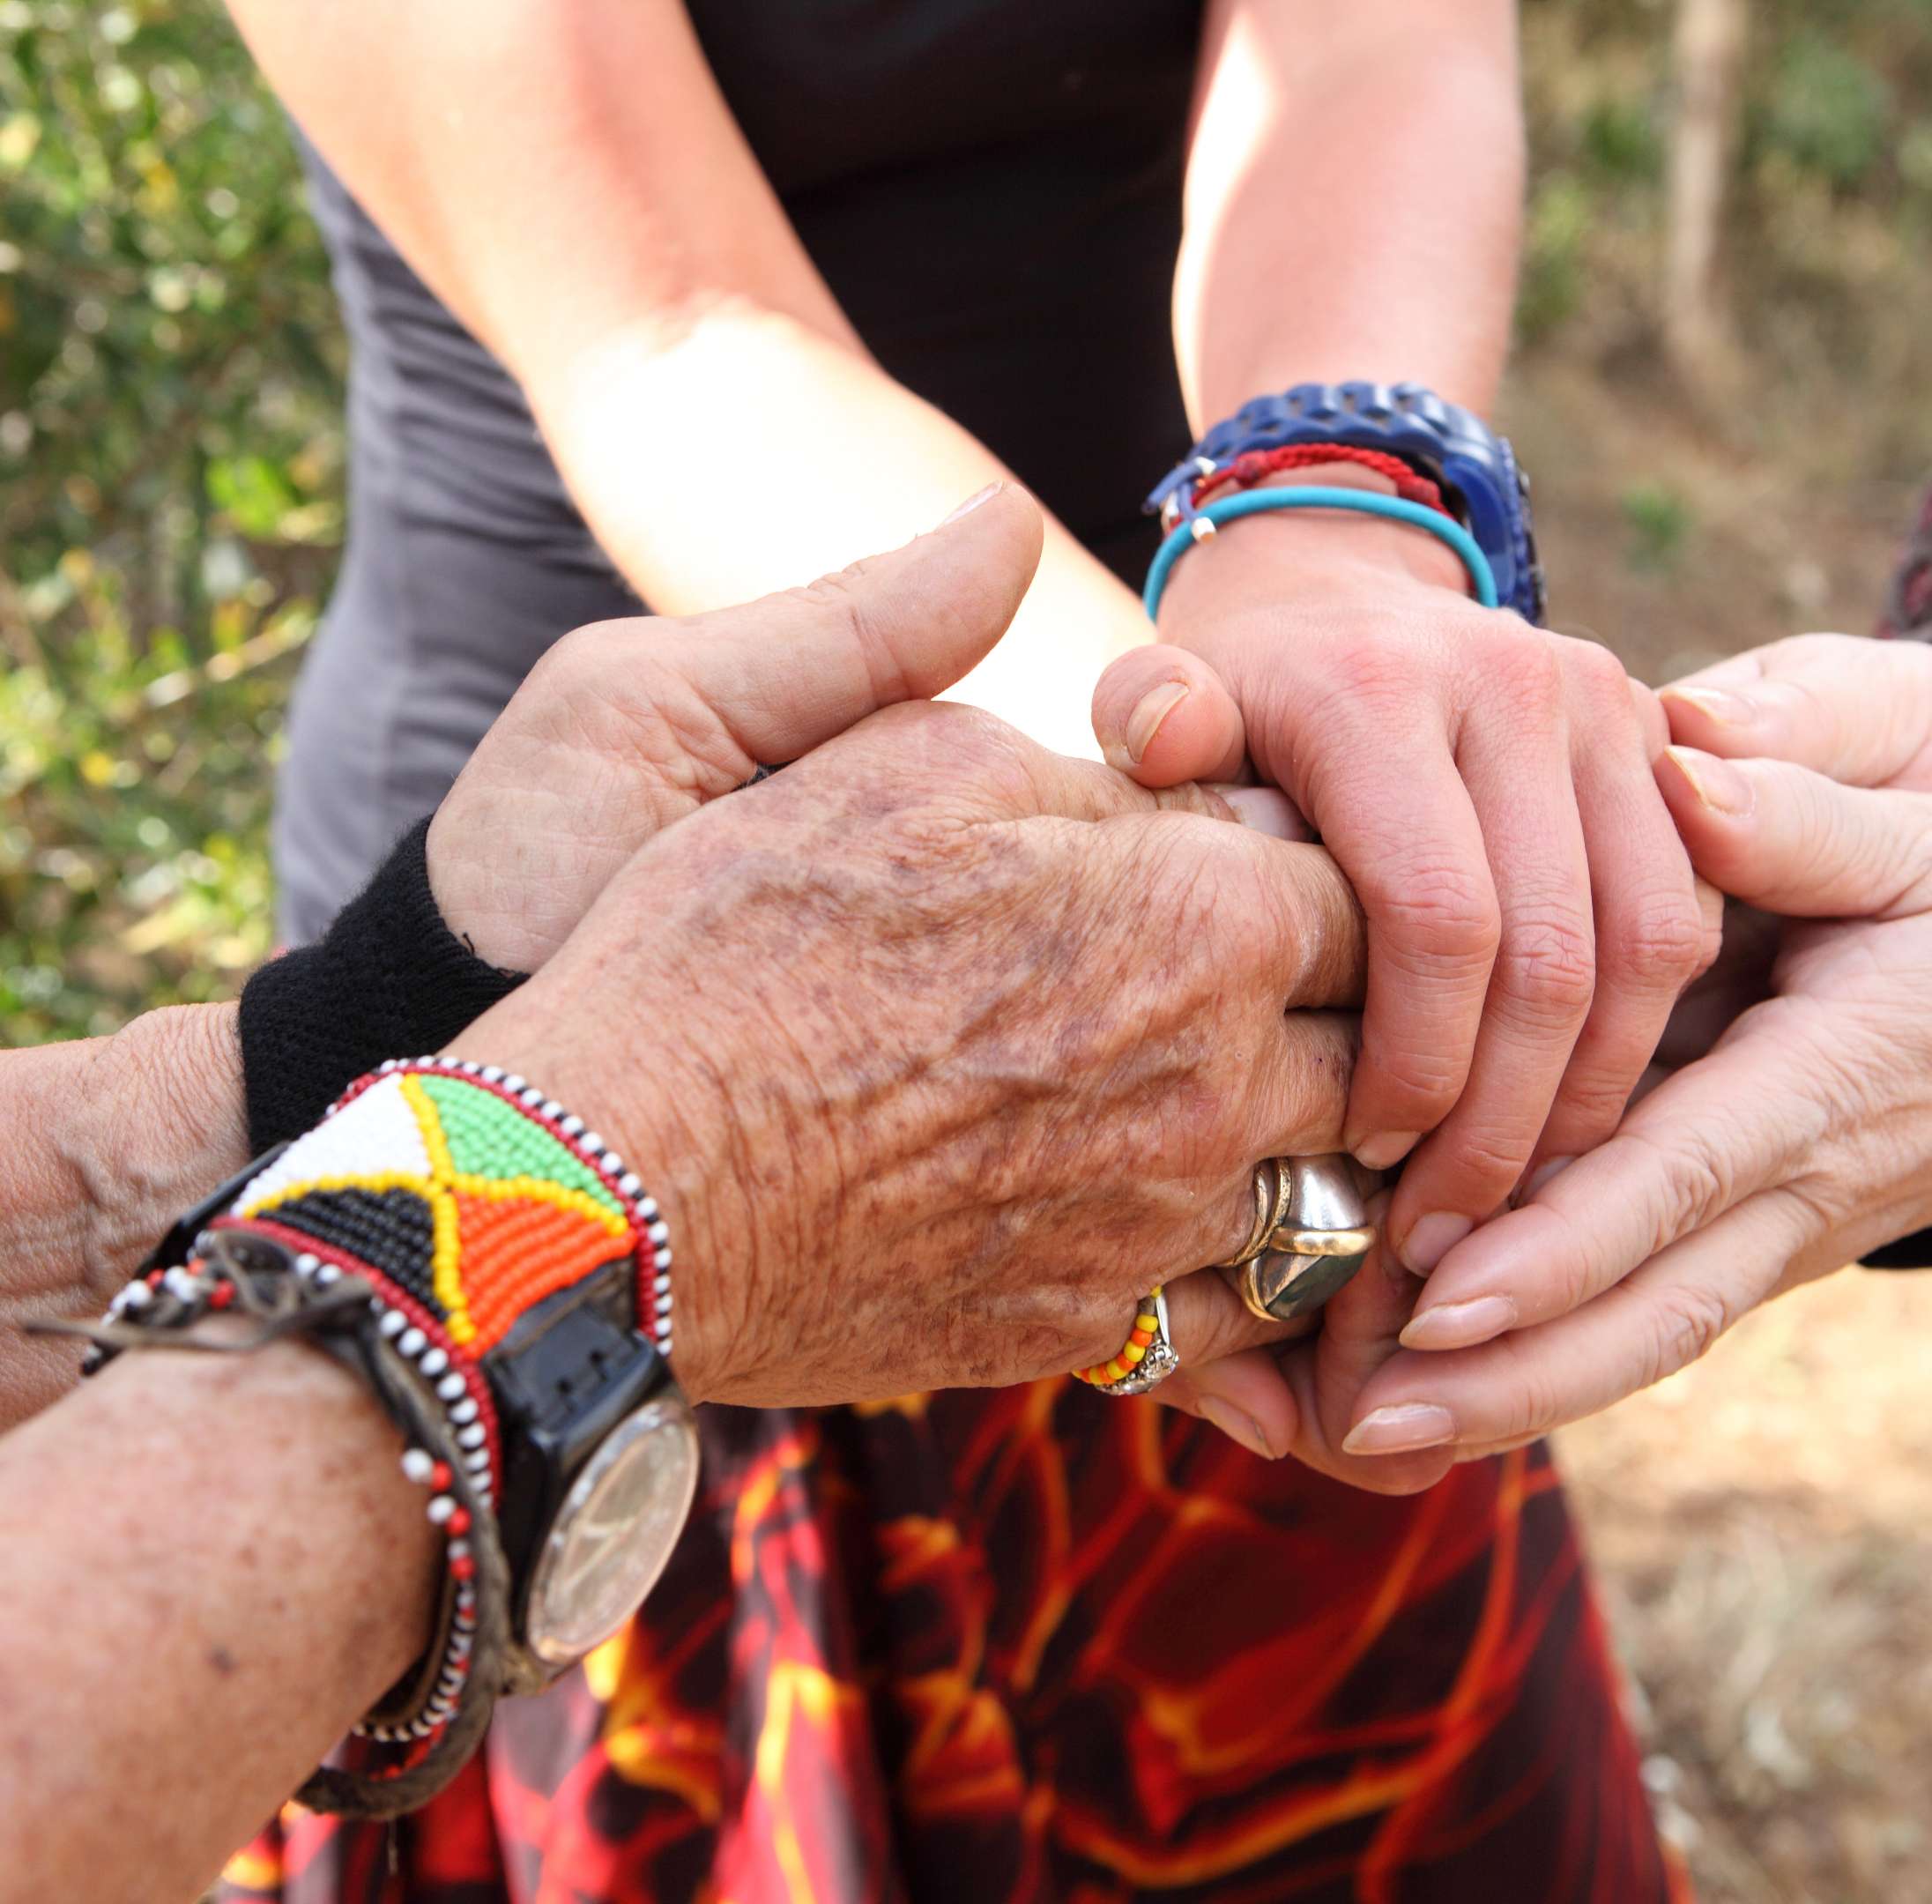 Three pairs of hands of varying ages and skin tones, two wearing colorful bracelets, reach out and embrace each other.